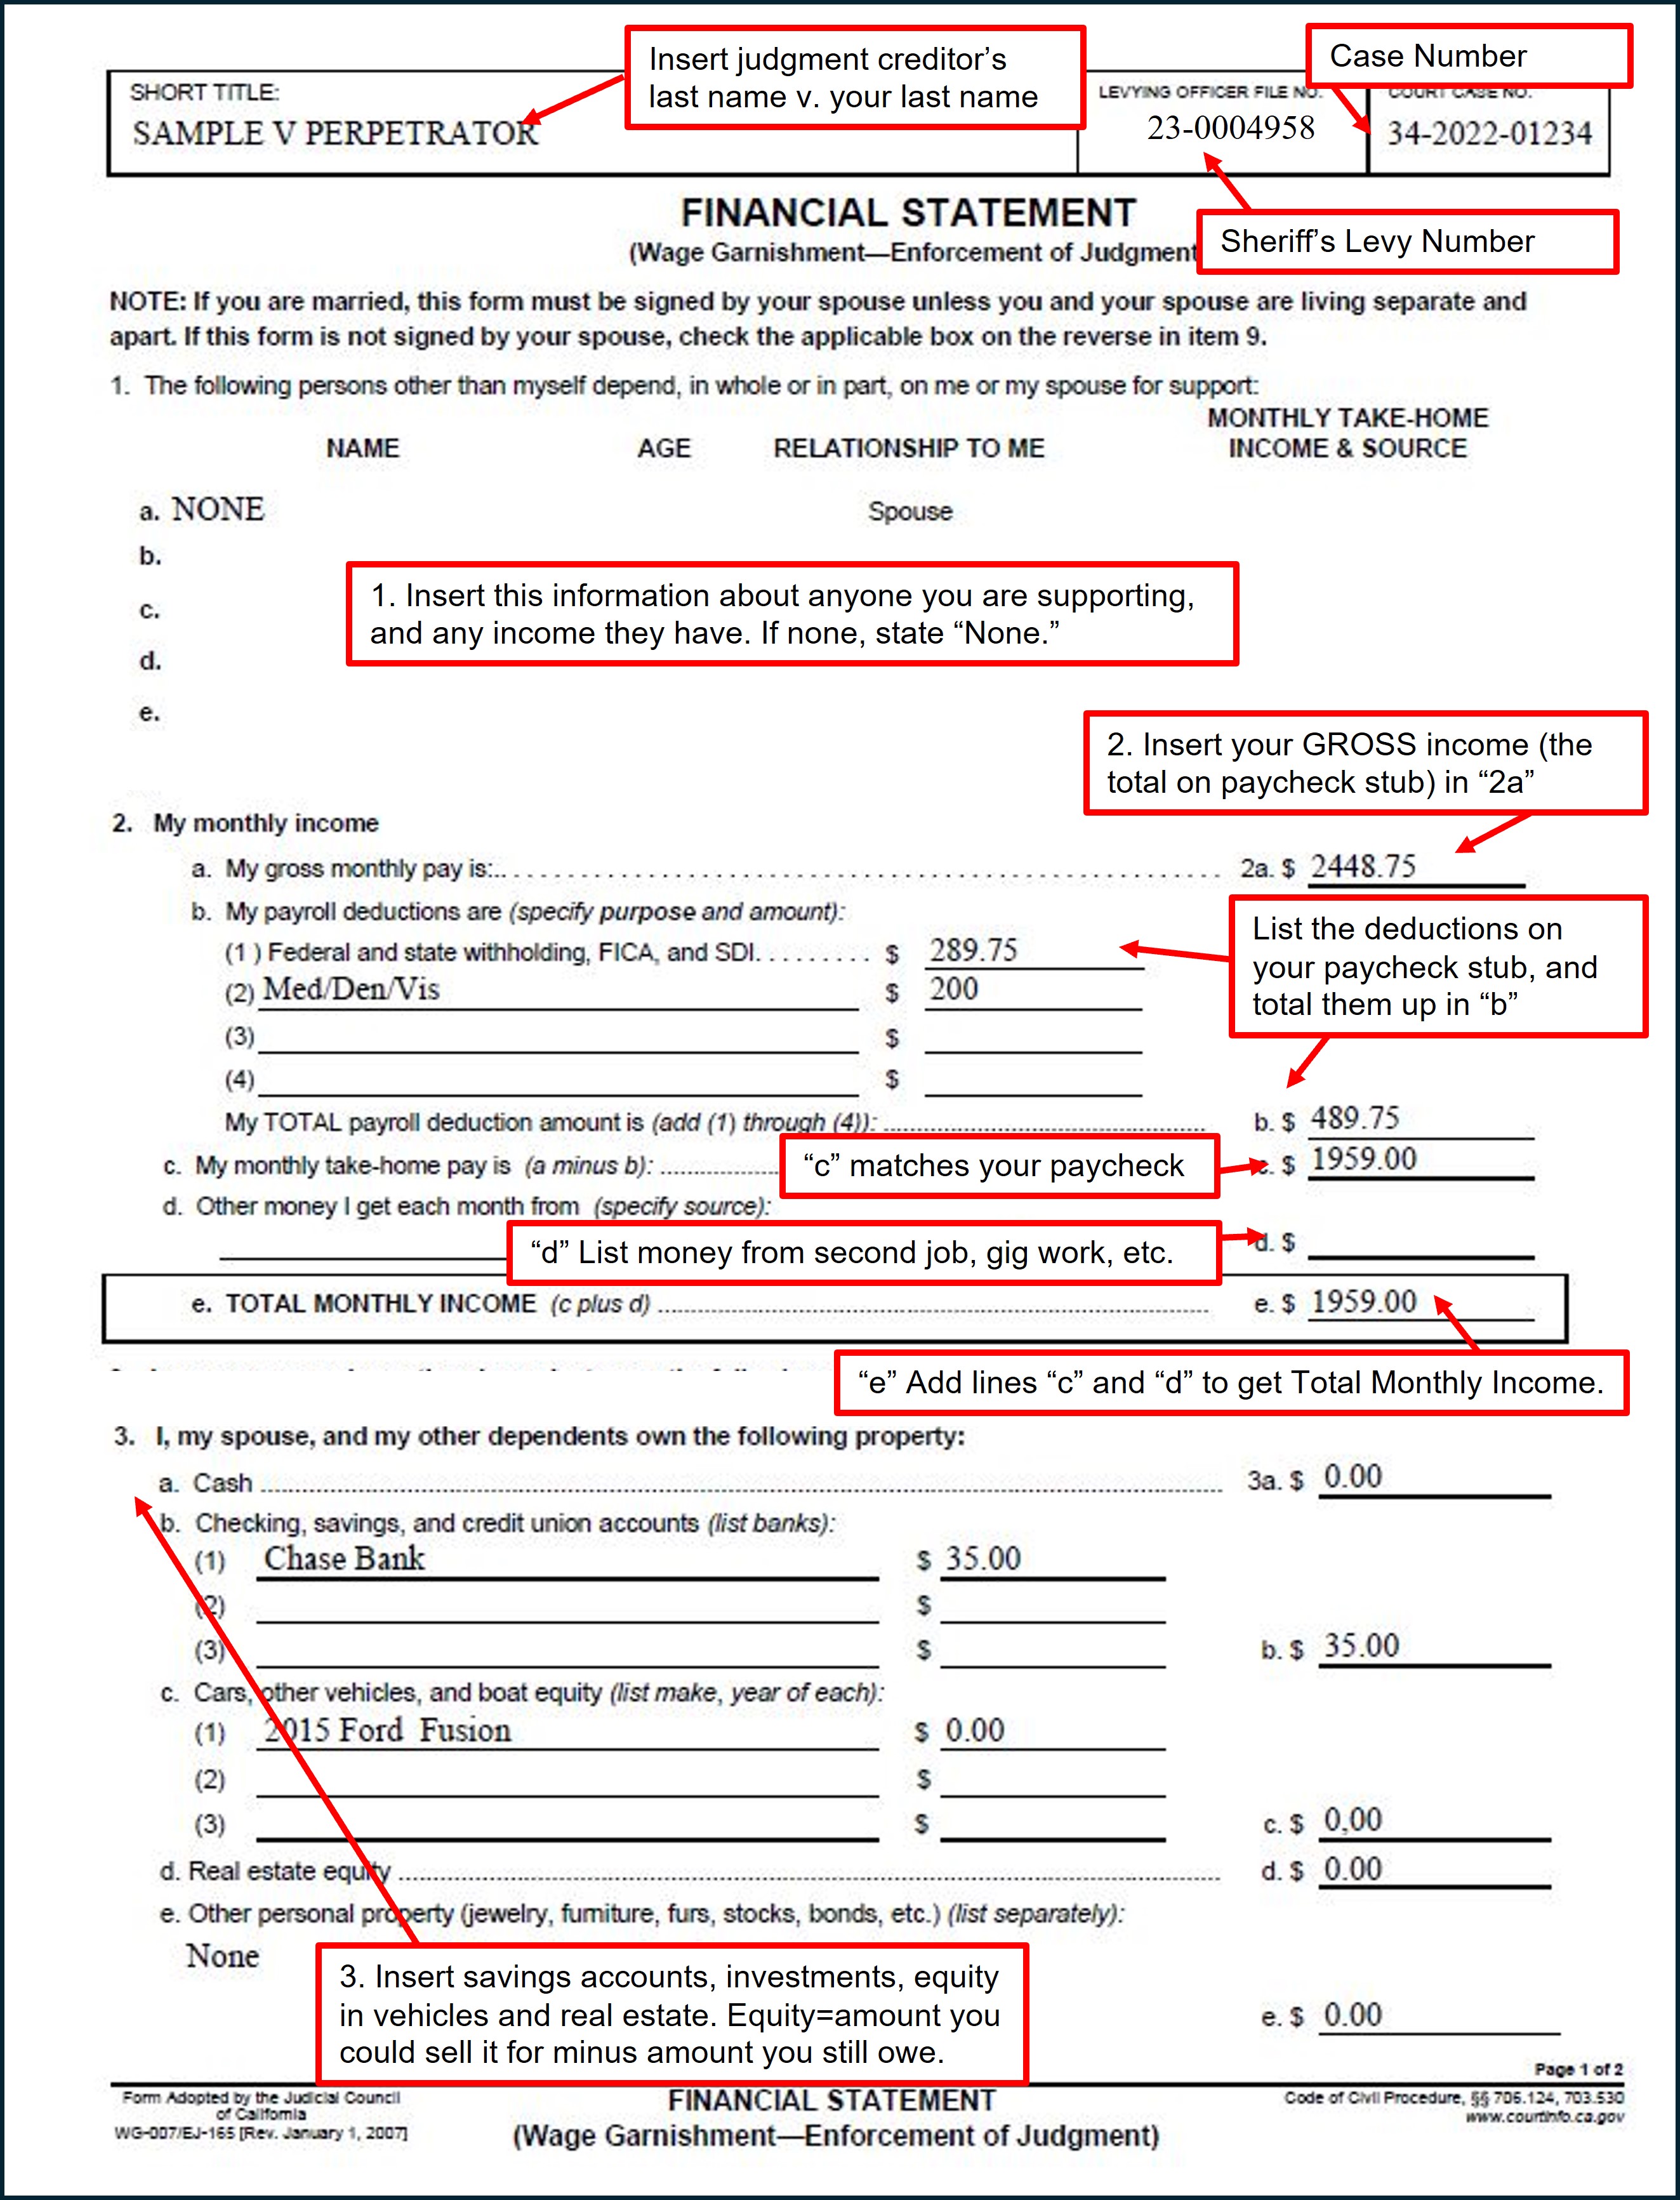 Filled out sample Financial Statement (WG-007/EJ-165) (page 1)